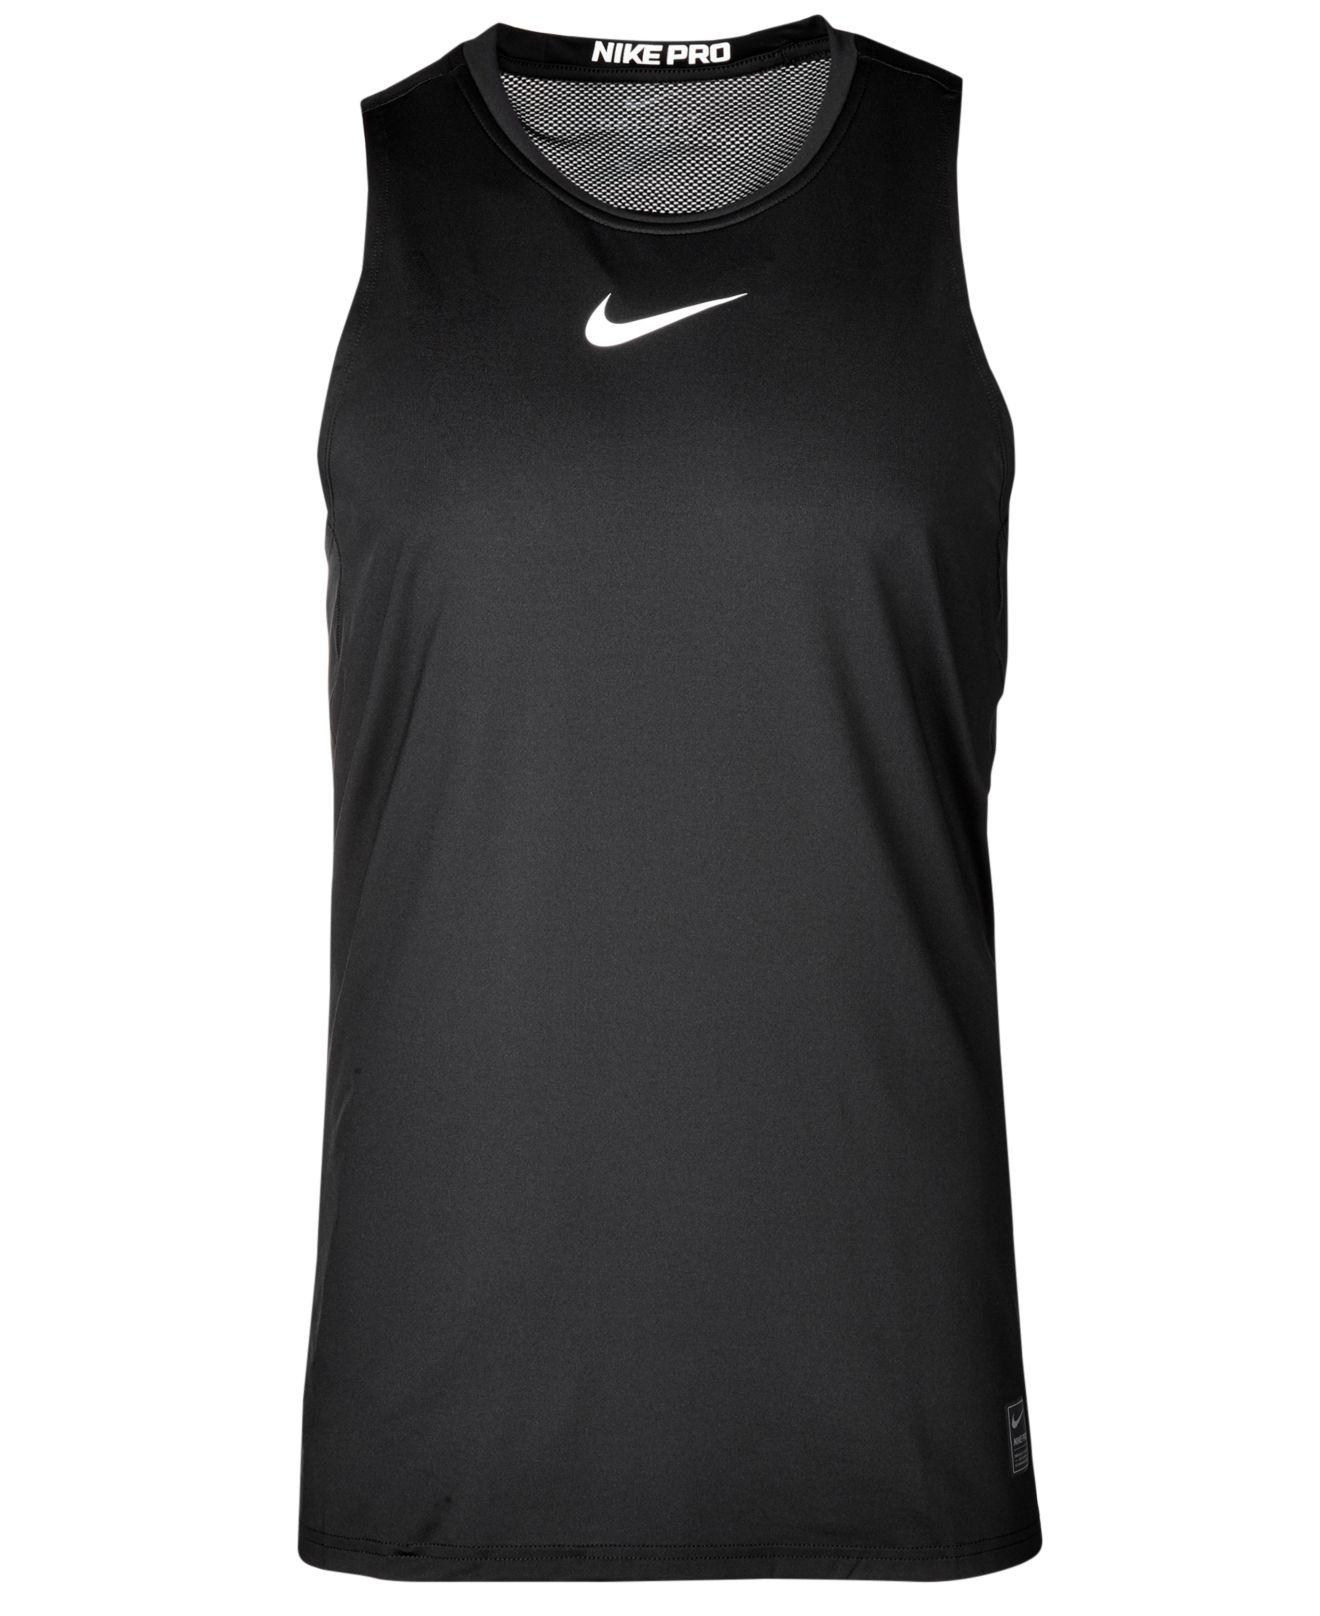 men's sleeveless fitted top nike pro